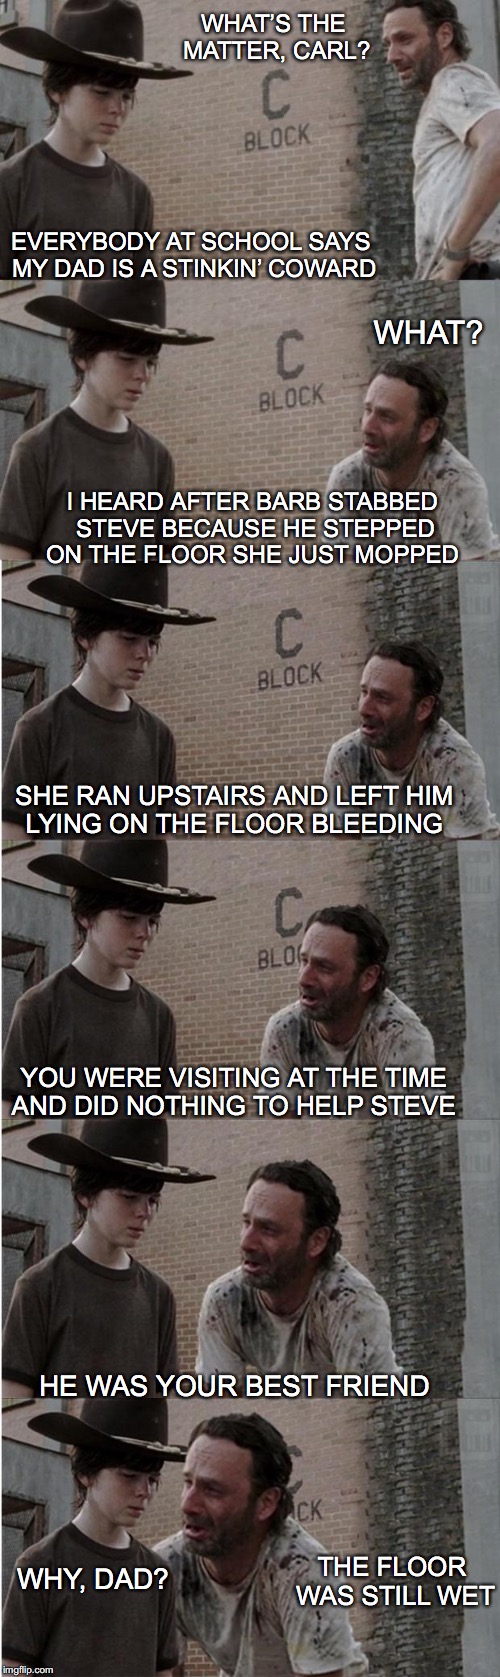 Rick and Carl Longer Meme | WHAT’S THE MATTER, CARL? EVERYBODY AT SCHOOL SAYS MY DAD IS A STINKIN’ COWARD; WHAT? I HEARD AFTER BARB STABBED STEVE BECAUSE HE STEPPED ON THE FLOOR SHE JUST MOPPED; SHE RAN UPSTAIRS AND LEFT HIM LYING ON THE FLOOR BLEEDING; YOU WERE VISITING AT THE TIME AND DID NOTHING TO HELP STEVE; HE WAS YOUR BEST FRIEND; THE FLOOR WAS STILL WET; WHY, DAD? | image tagged in memes,rick and carl longer,domestic violence | made w/ Imgflip meme maker